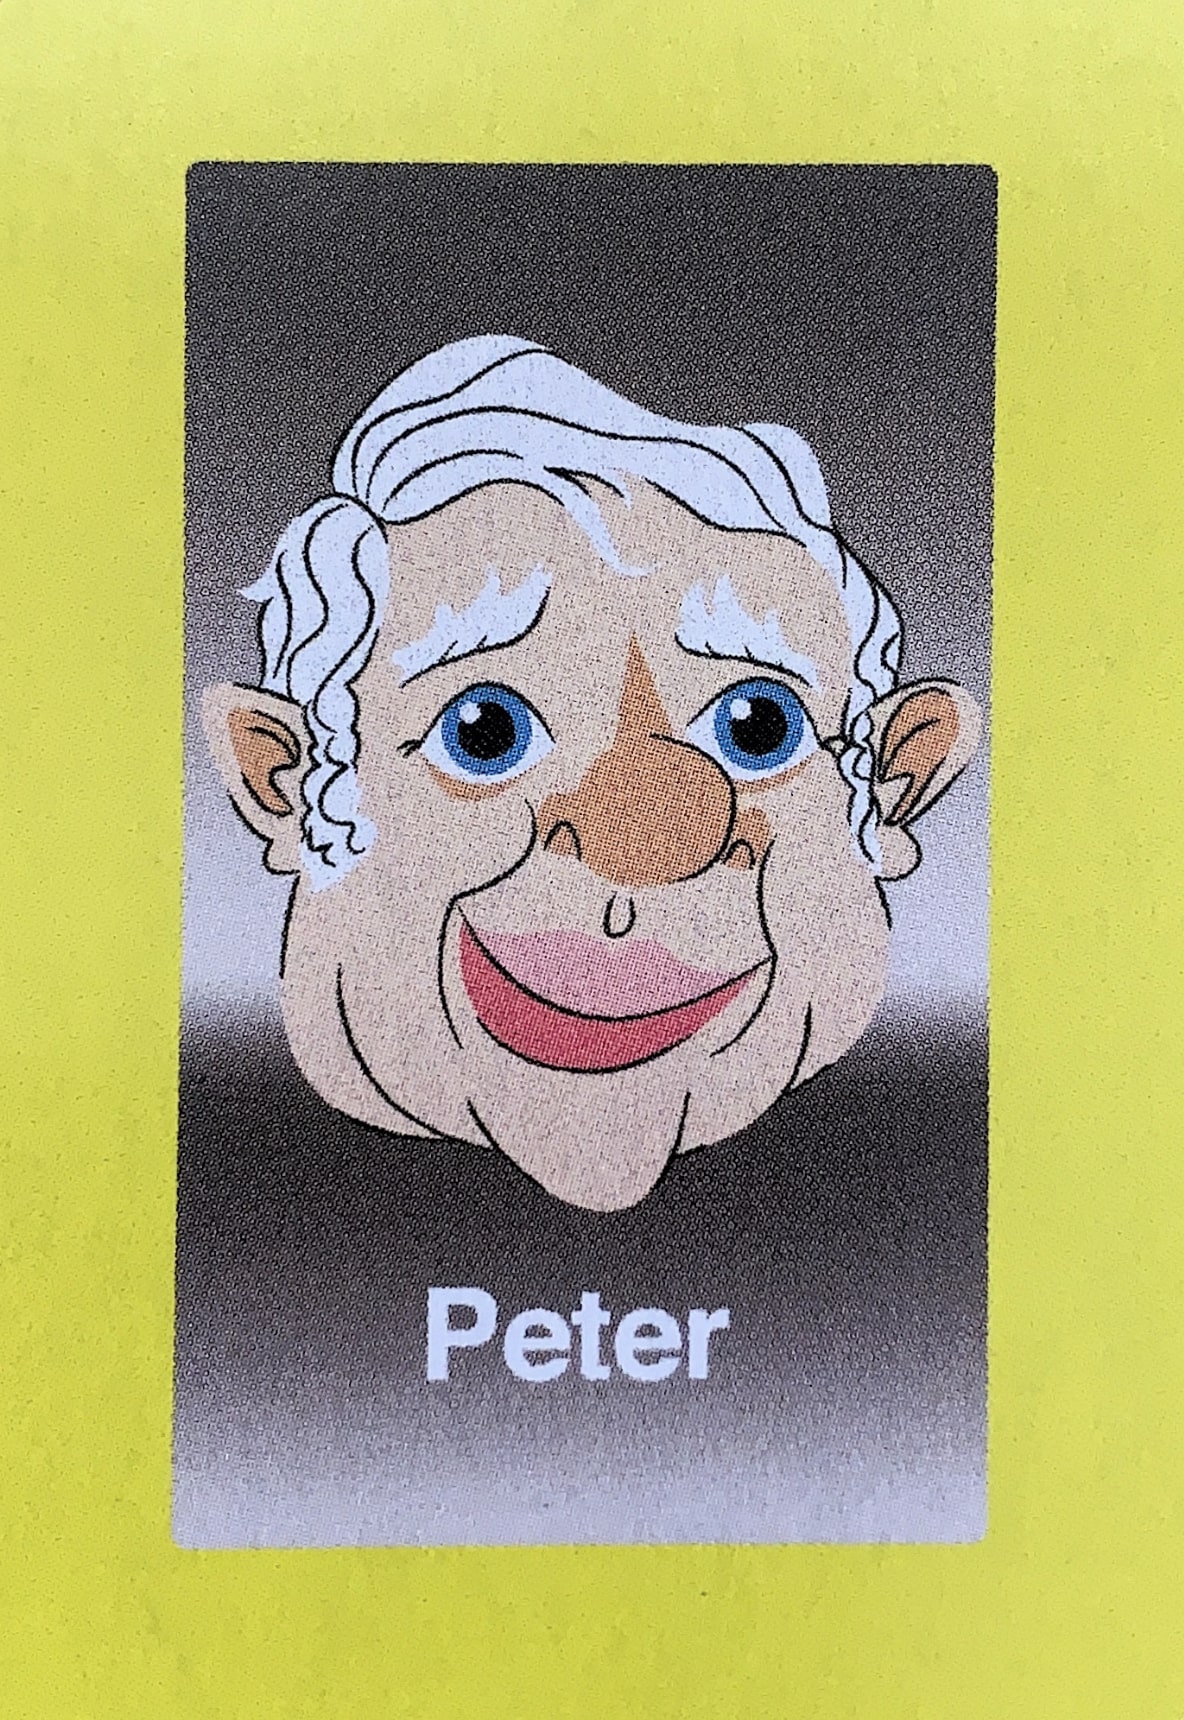  - Peter was a mid-level executive at Milton Bradley when the decision to go forward with the secret Guess Who?® project was made. Senior executives on the board of Milton Bradley thought he had an interesting face, and frankly, they didn’t like Peter very much. He was told of his new role within the company, as a face card for the game, and was relieved of all previous responsibilities. In retrospect, it was a savvy move by the board, sacking an unpleasant executive while avoiding a costly buy-out package. And he does have an interesting face.